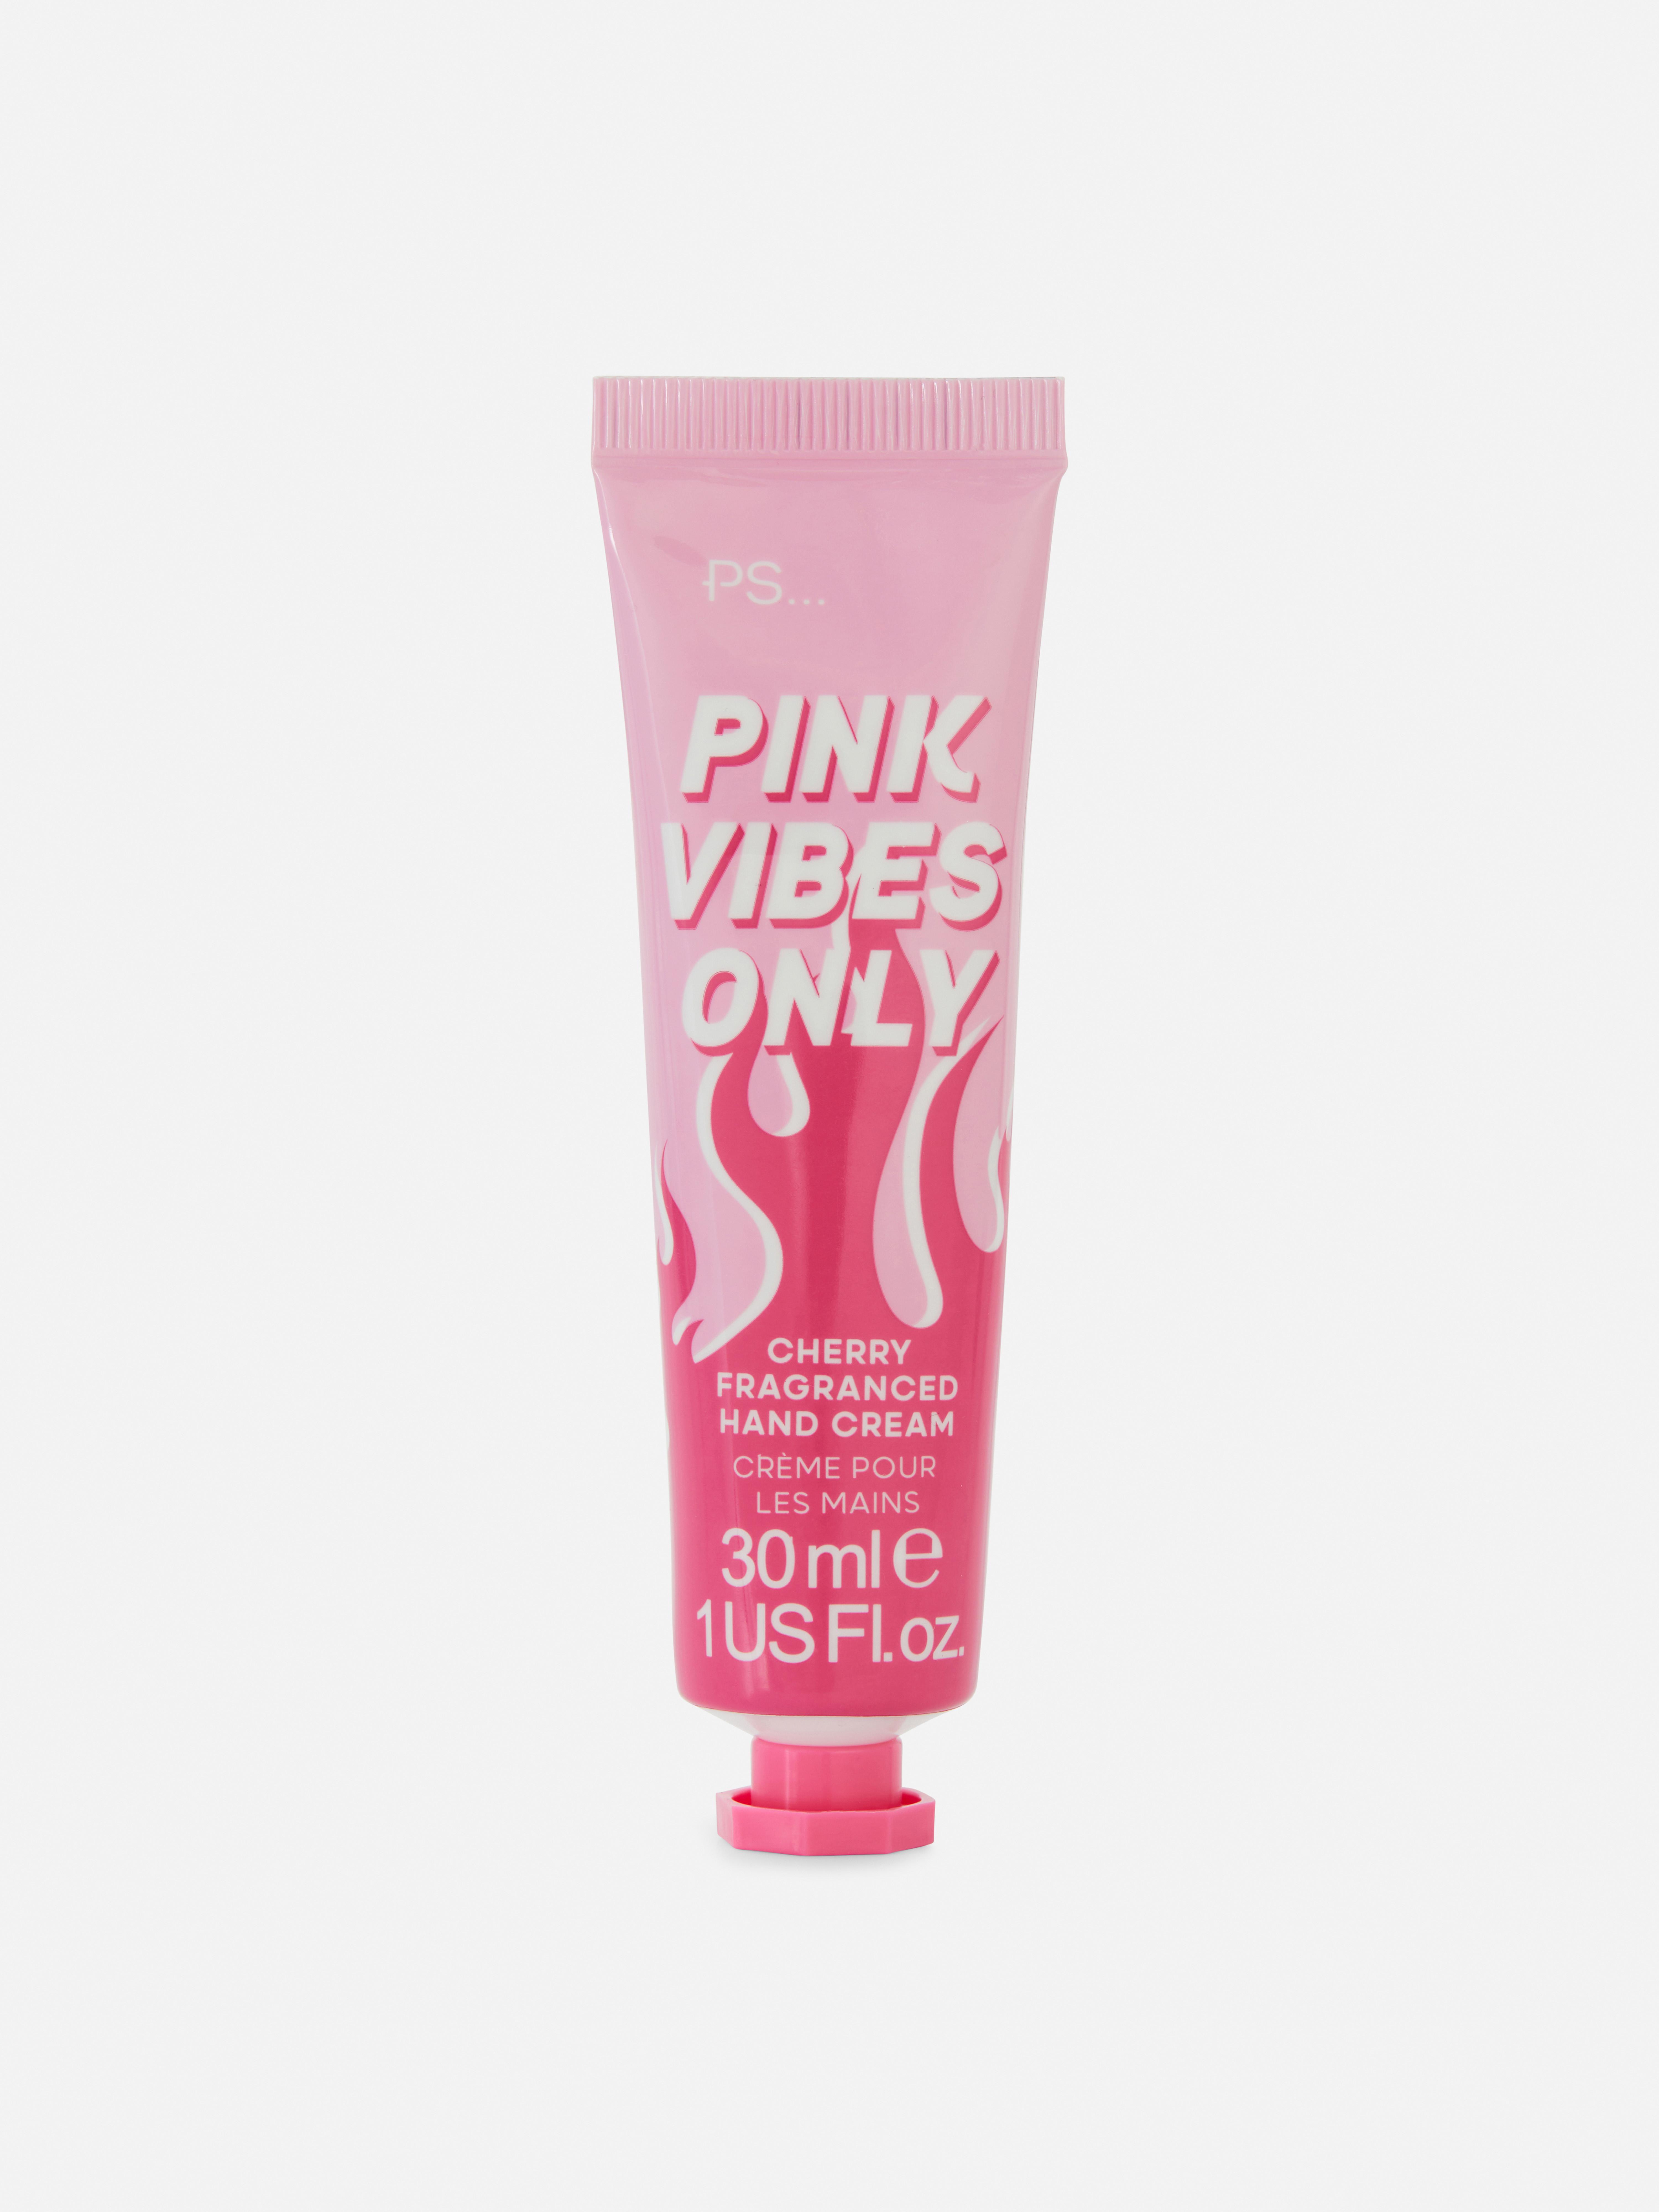 PS... Creme mãos Pink Vibes Only